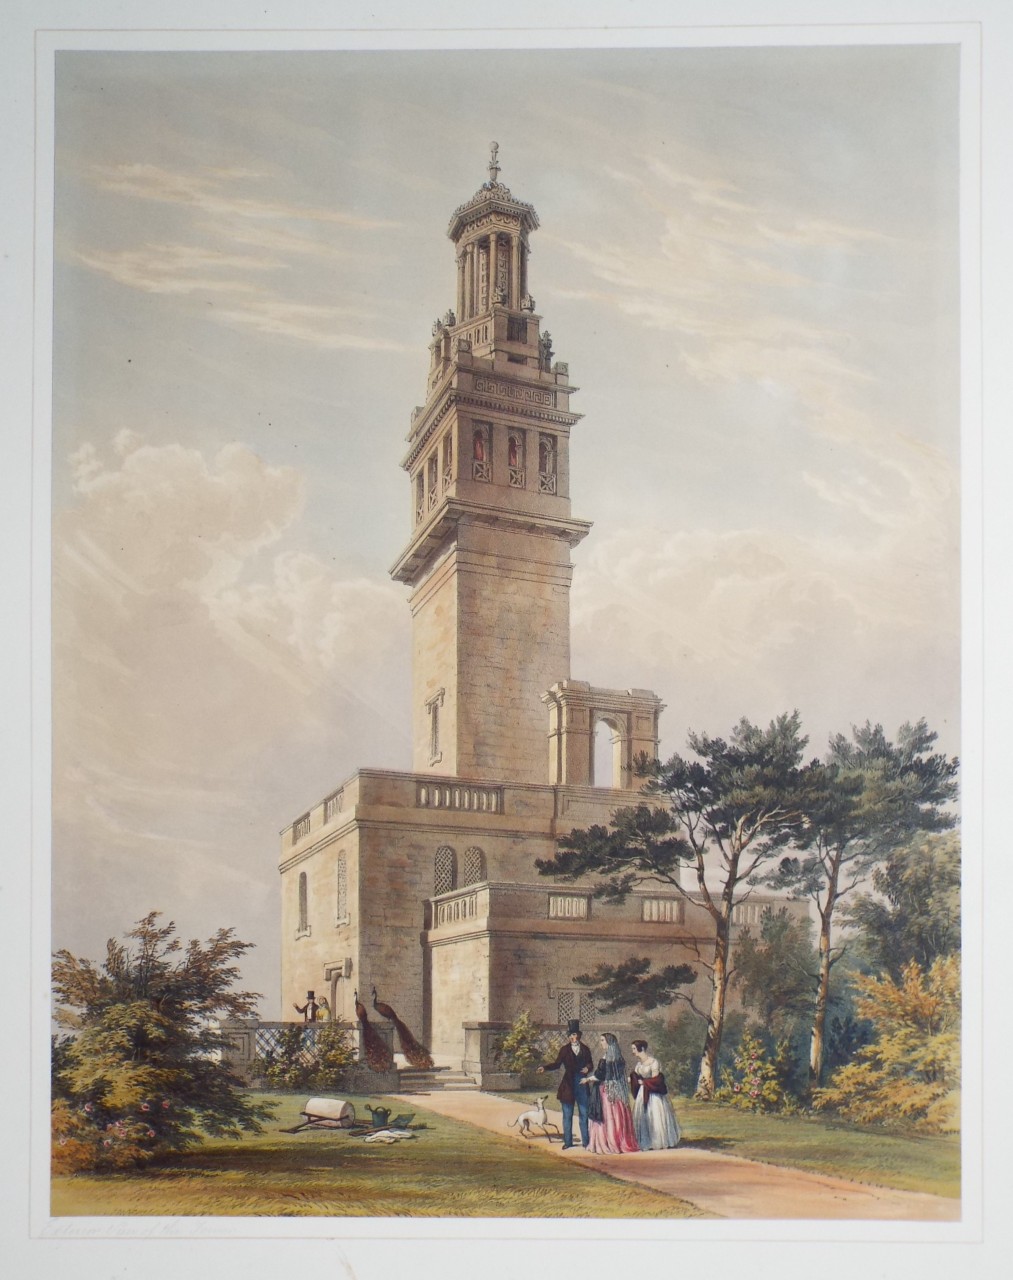 Chromo-lithograph - Exterior View of the Tower. - Richardson